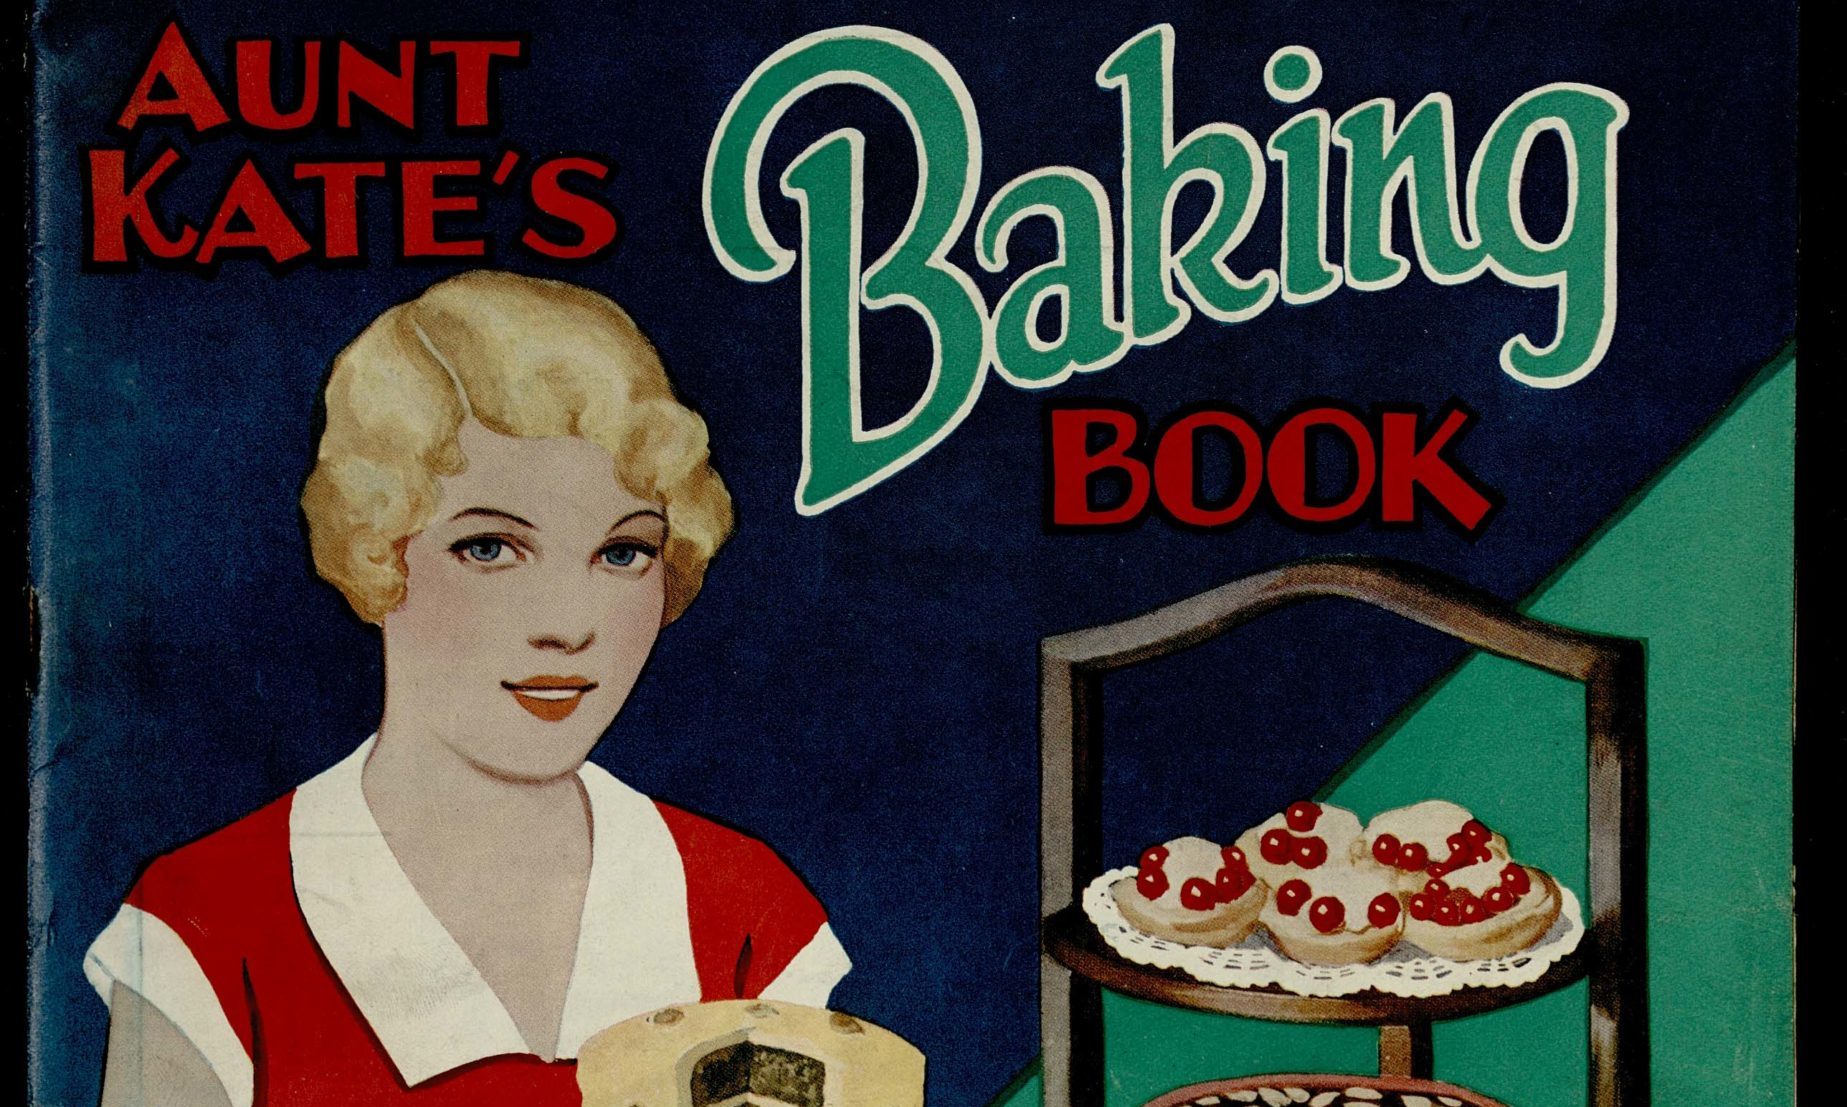 Aunt Kate's Baking Book from 1933.